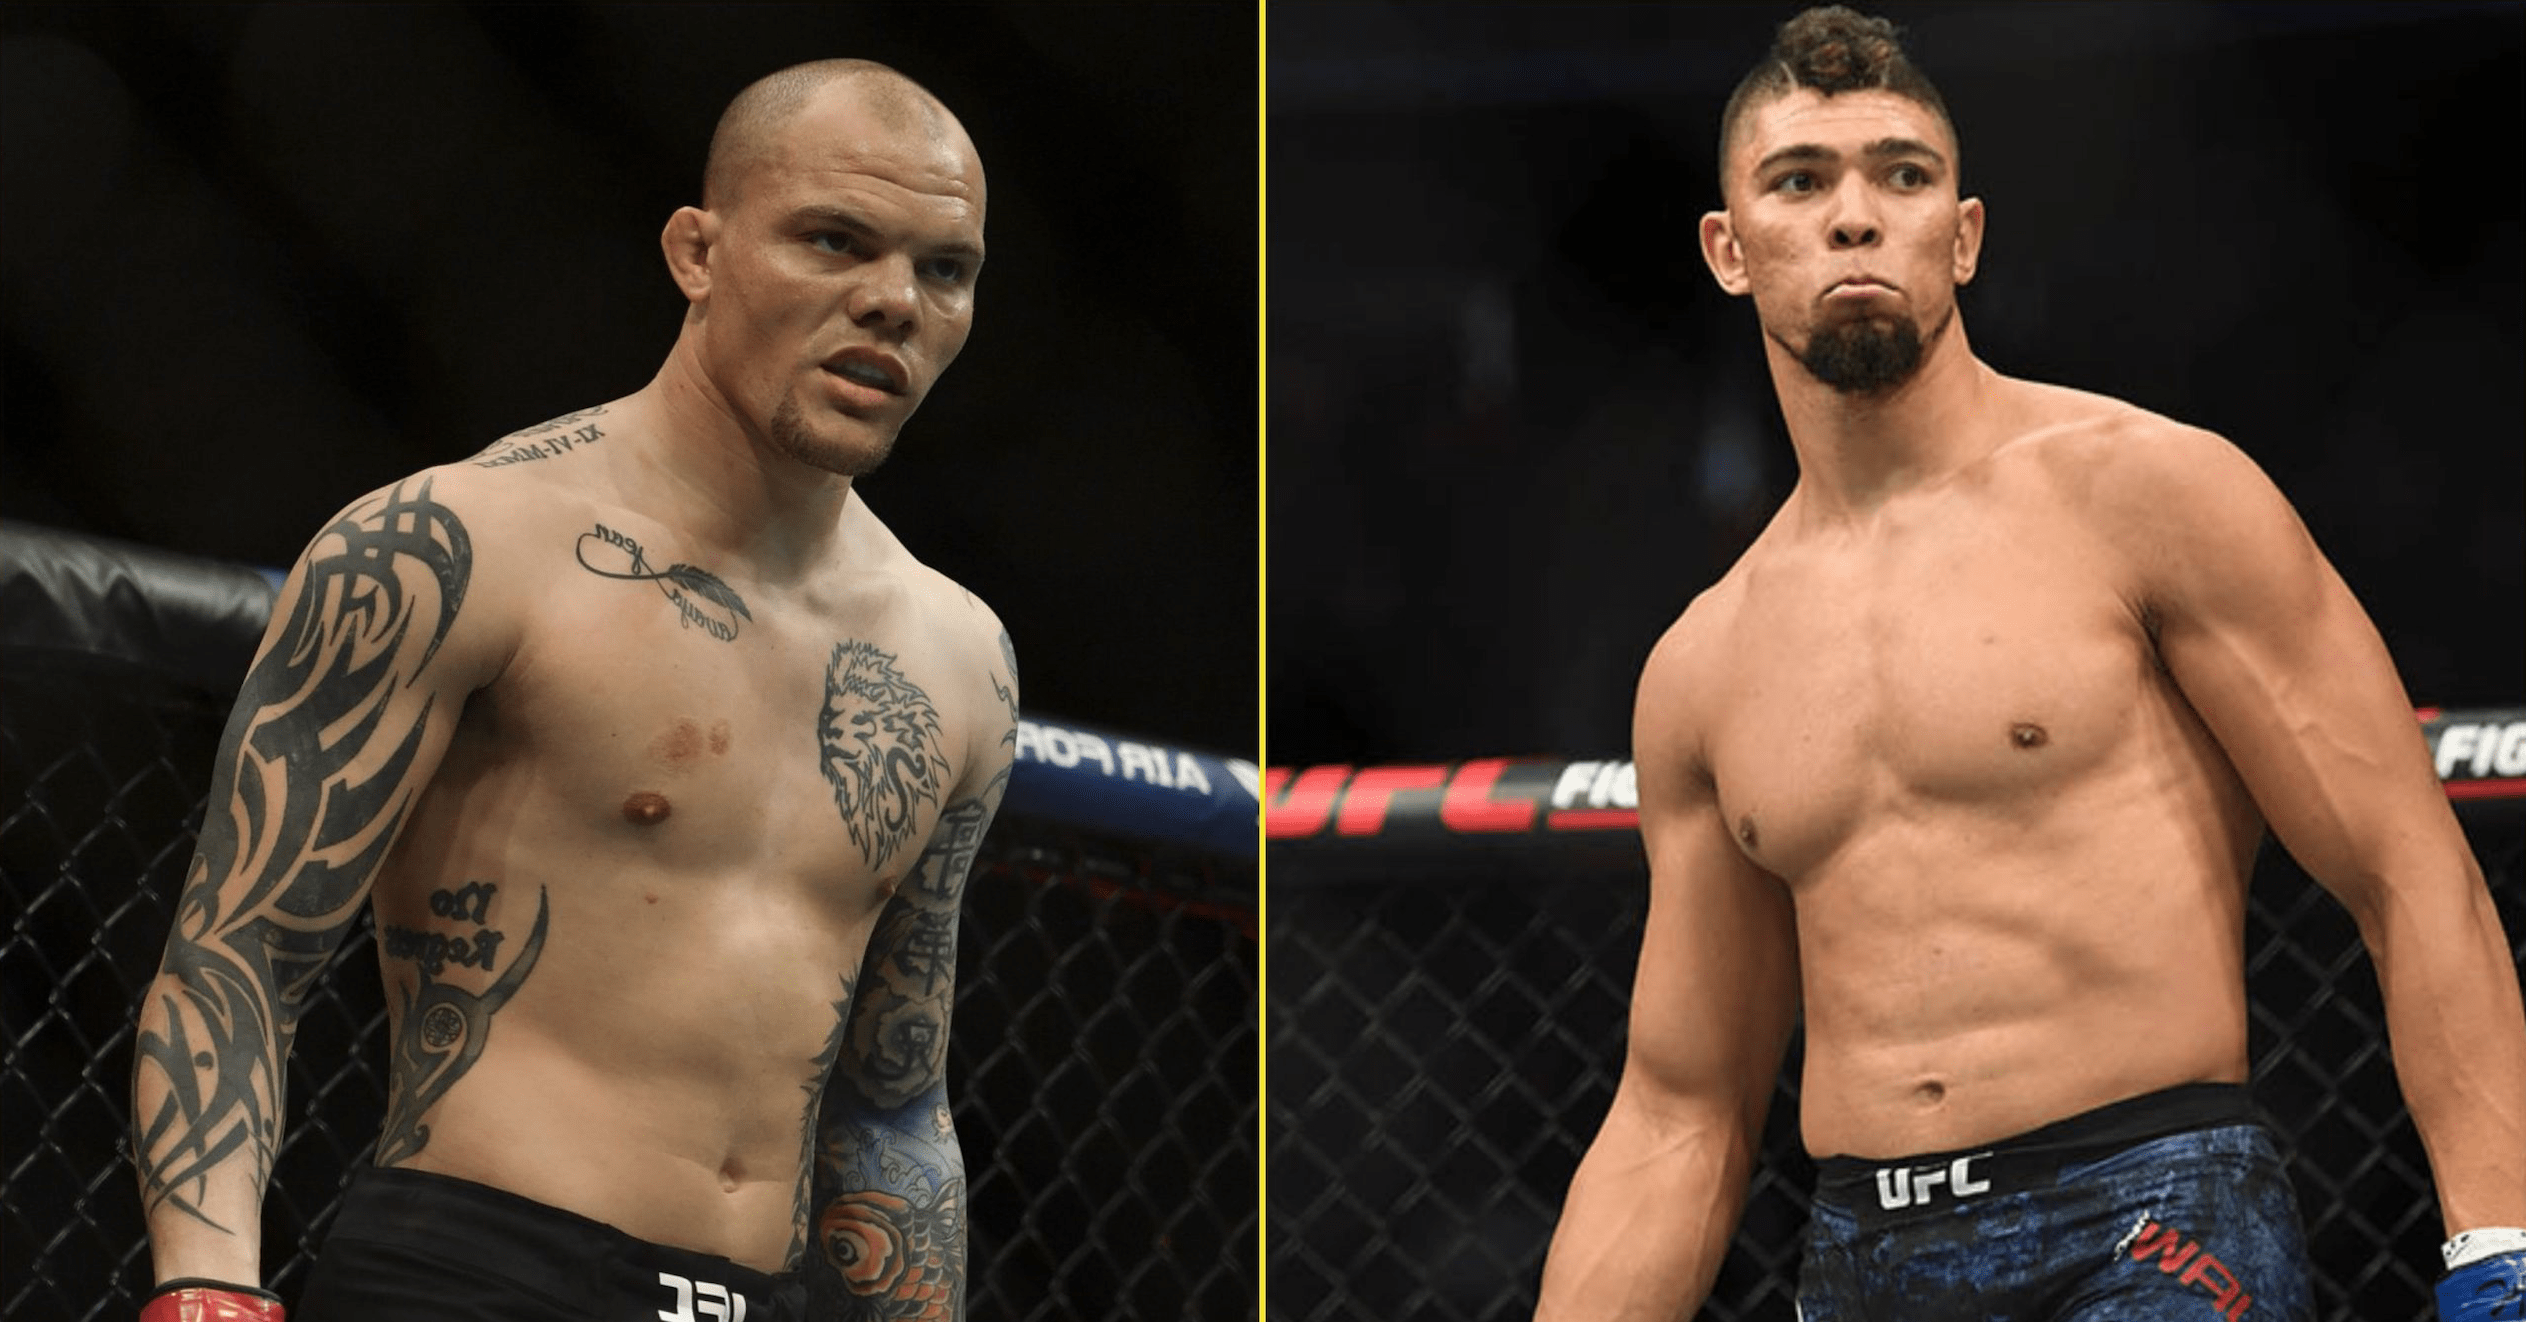 Anthony Smith vs Johnny Walker: Preview, Where to Watch and Betting Odds